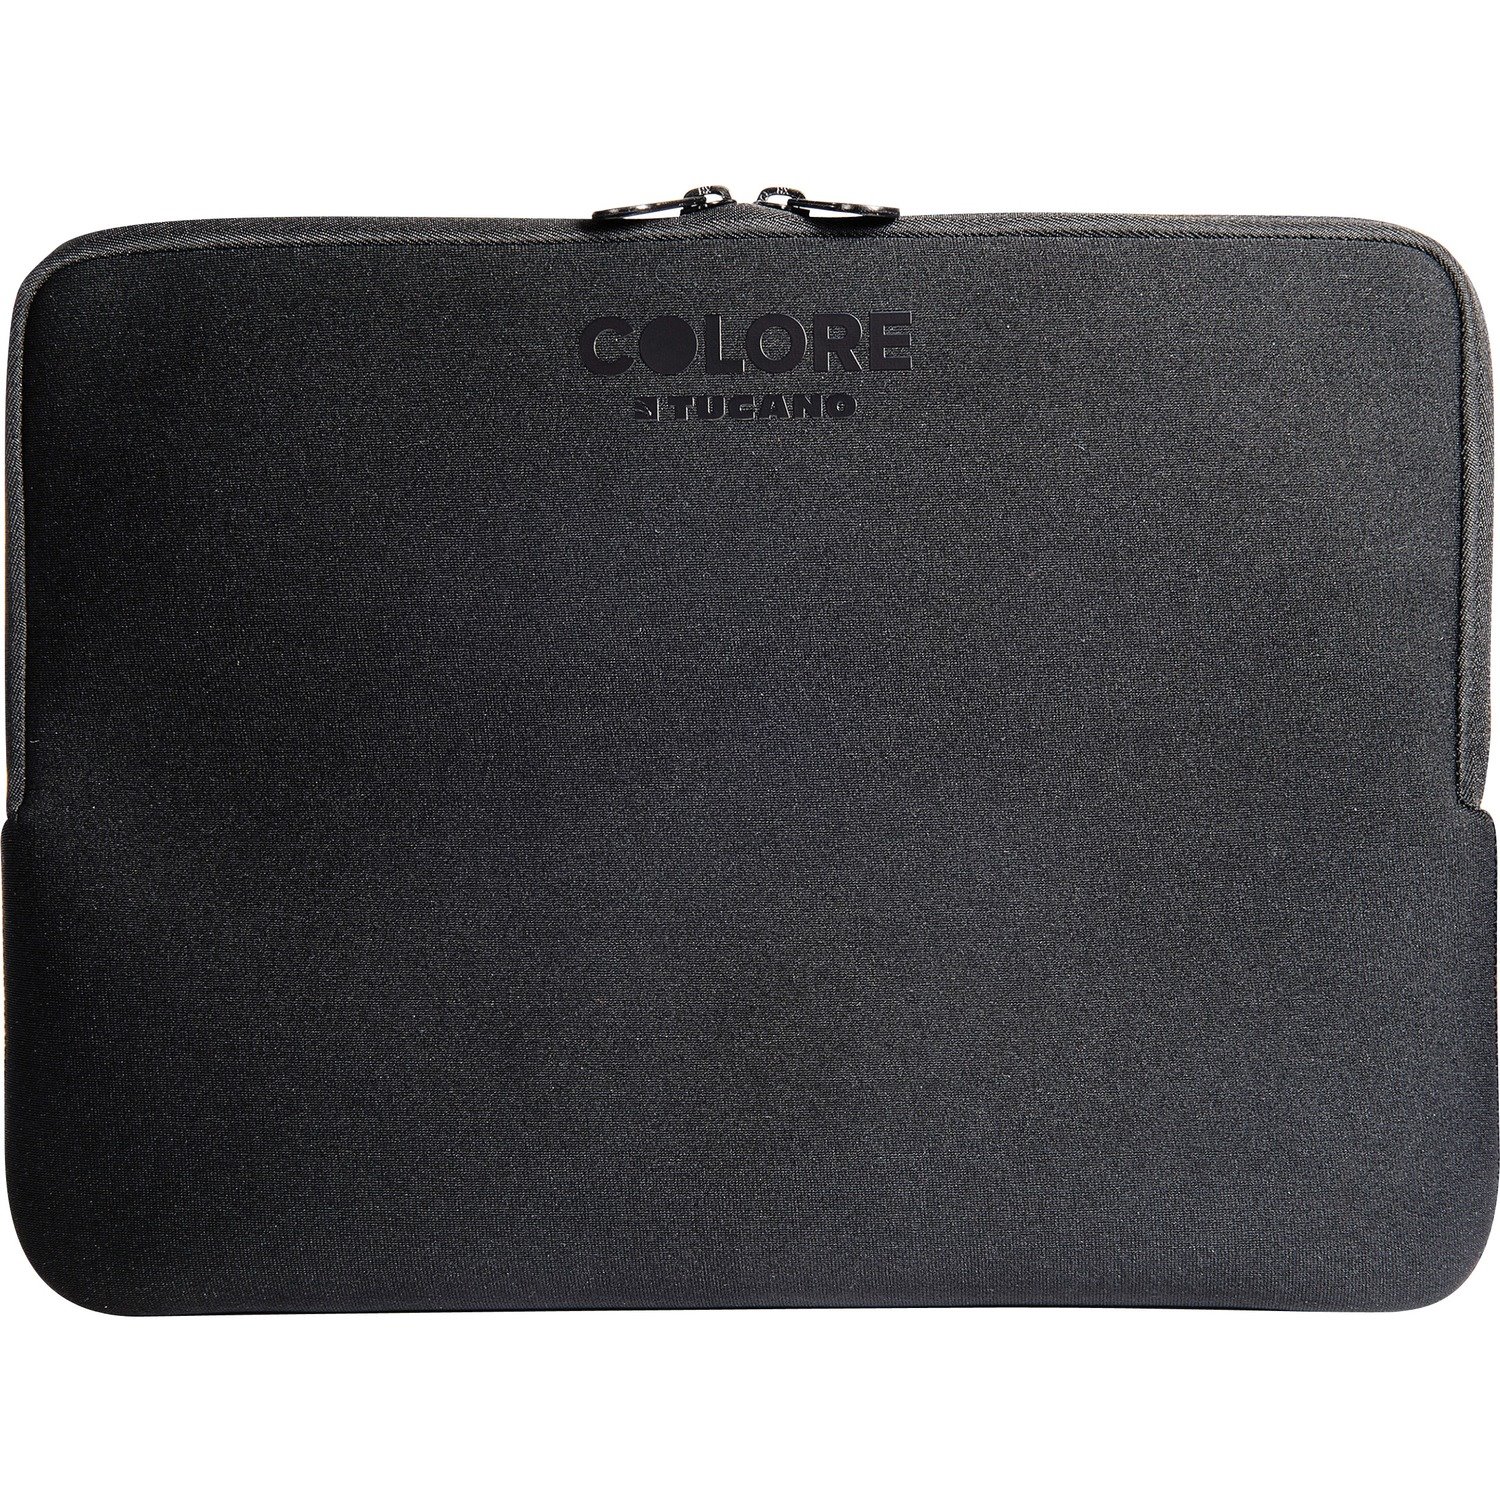 Tucano Colore Second Skin Carrying Case (Sleeve) for 31.8 cm (12.5") Notebook - Black